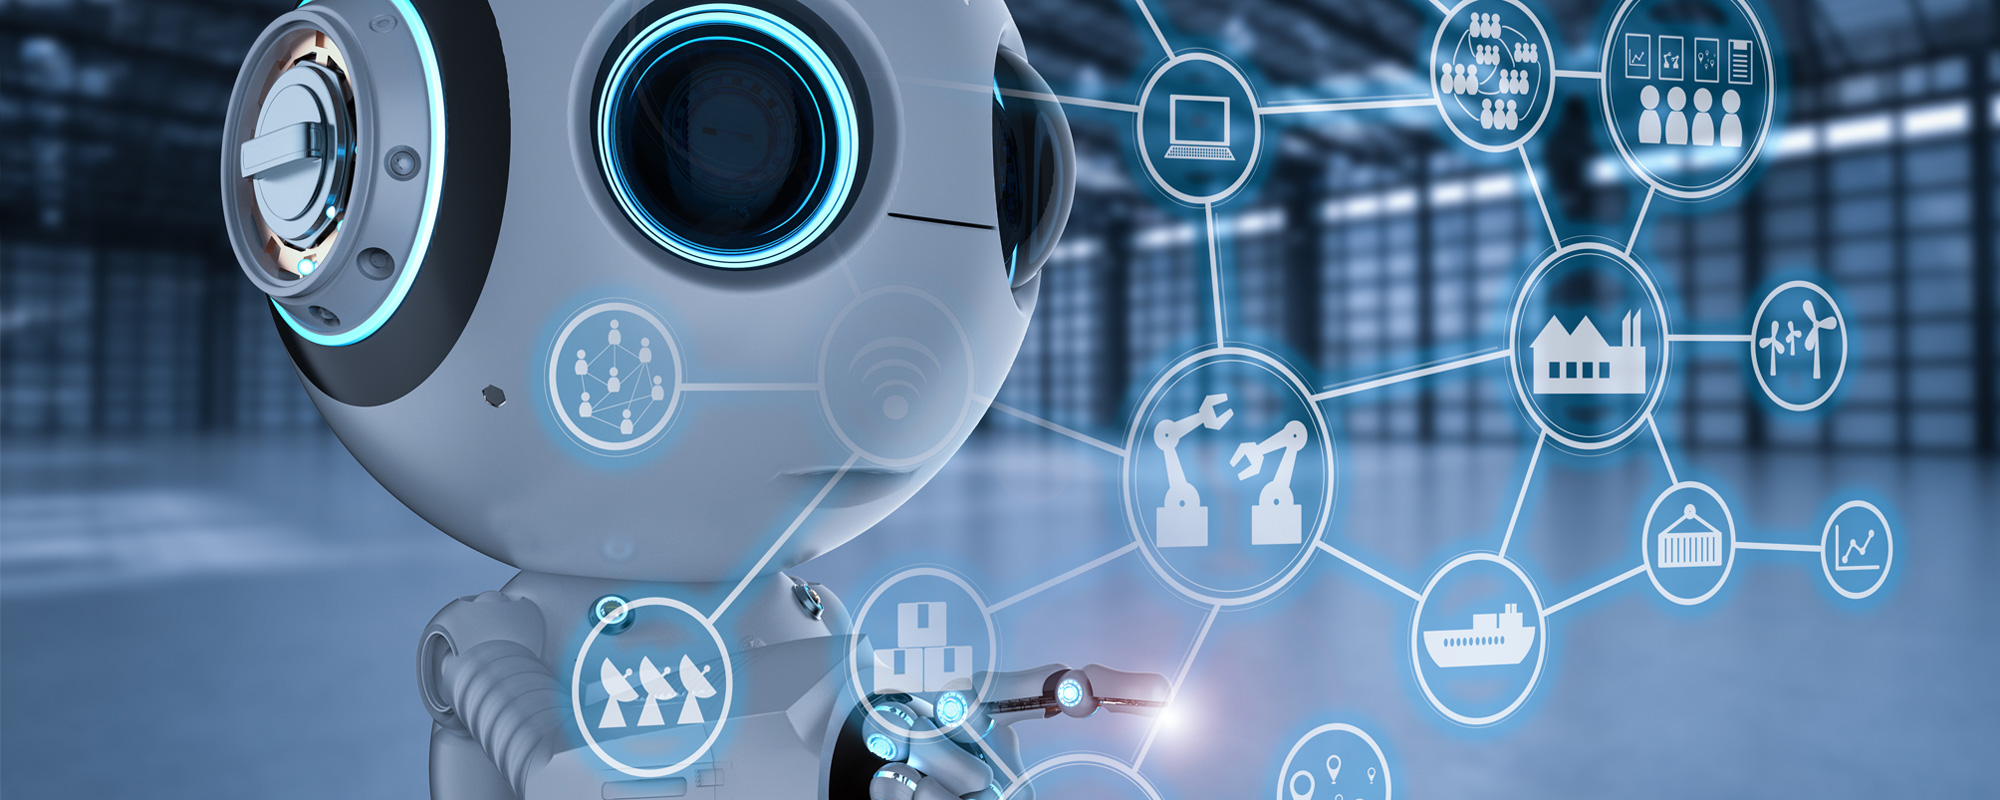 Digital Automation: Robotic Process Automation Applied to Claims Processing in Insurance